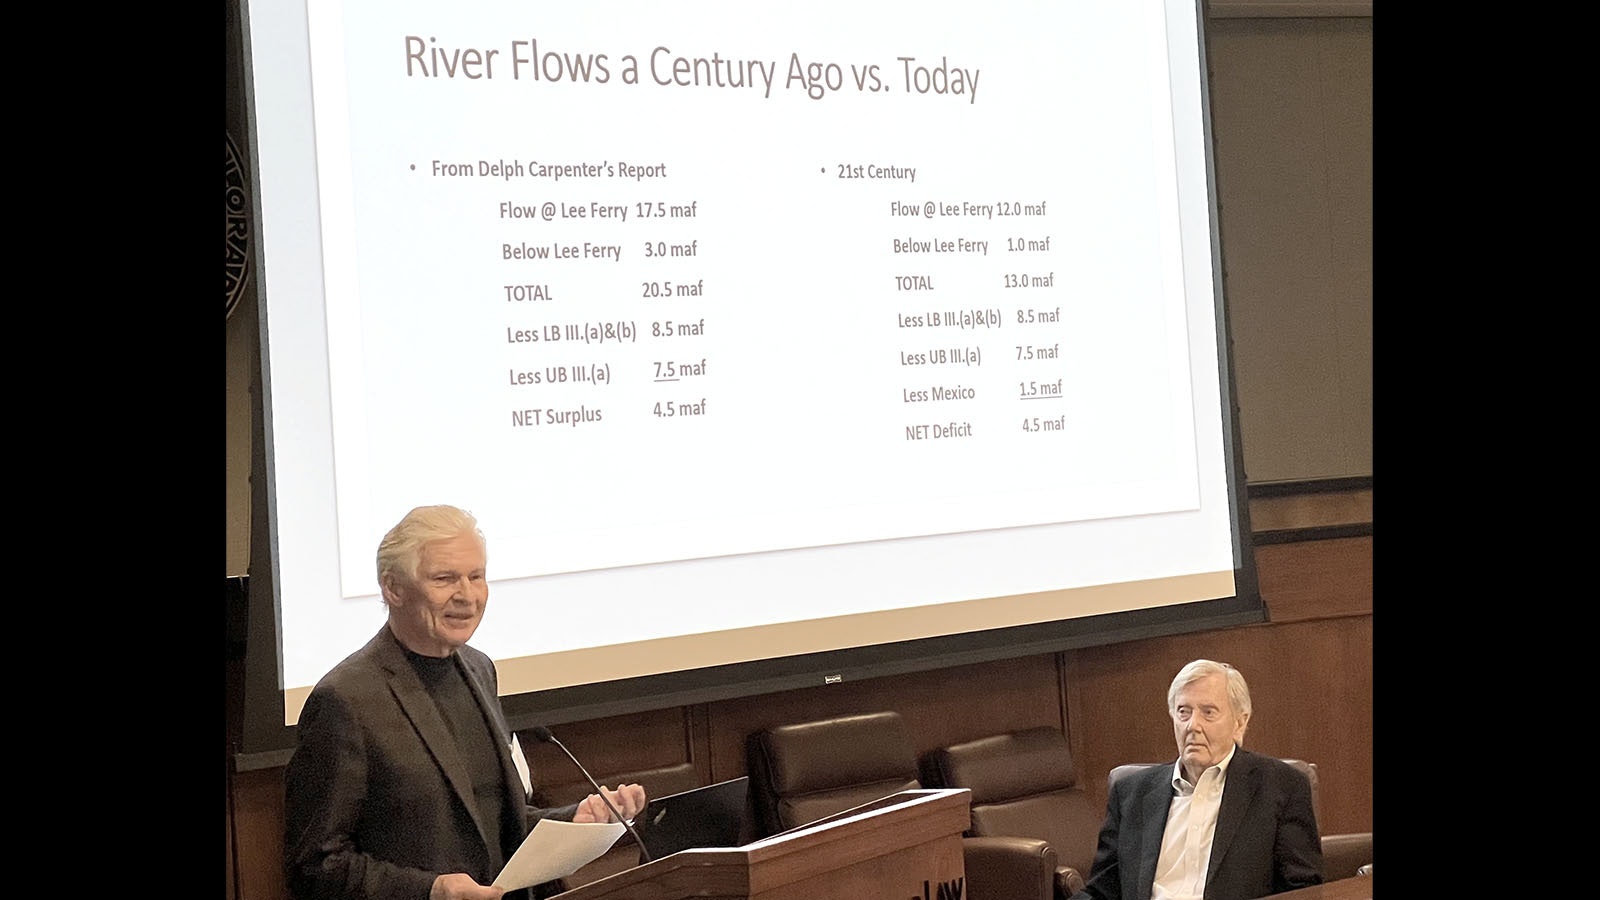 Former Colorado River District general manager Eric Kuhn and Former U.S. Interior Secretary Bruce Babbitt discussed diminished flows in the Colorado River on Friday during the “Crisis on the Colorado River” conference in Boulder, Colorado.